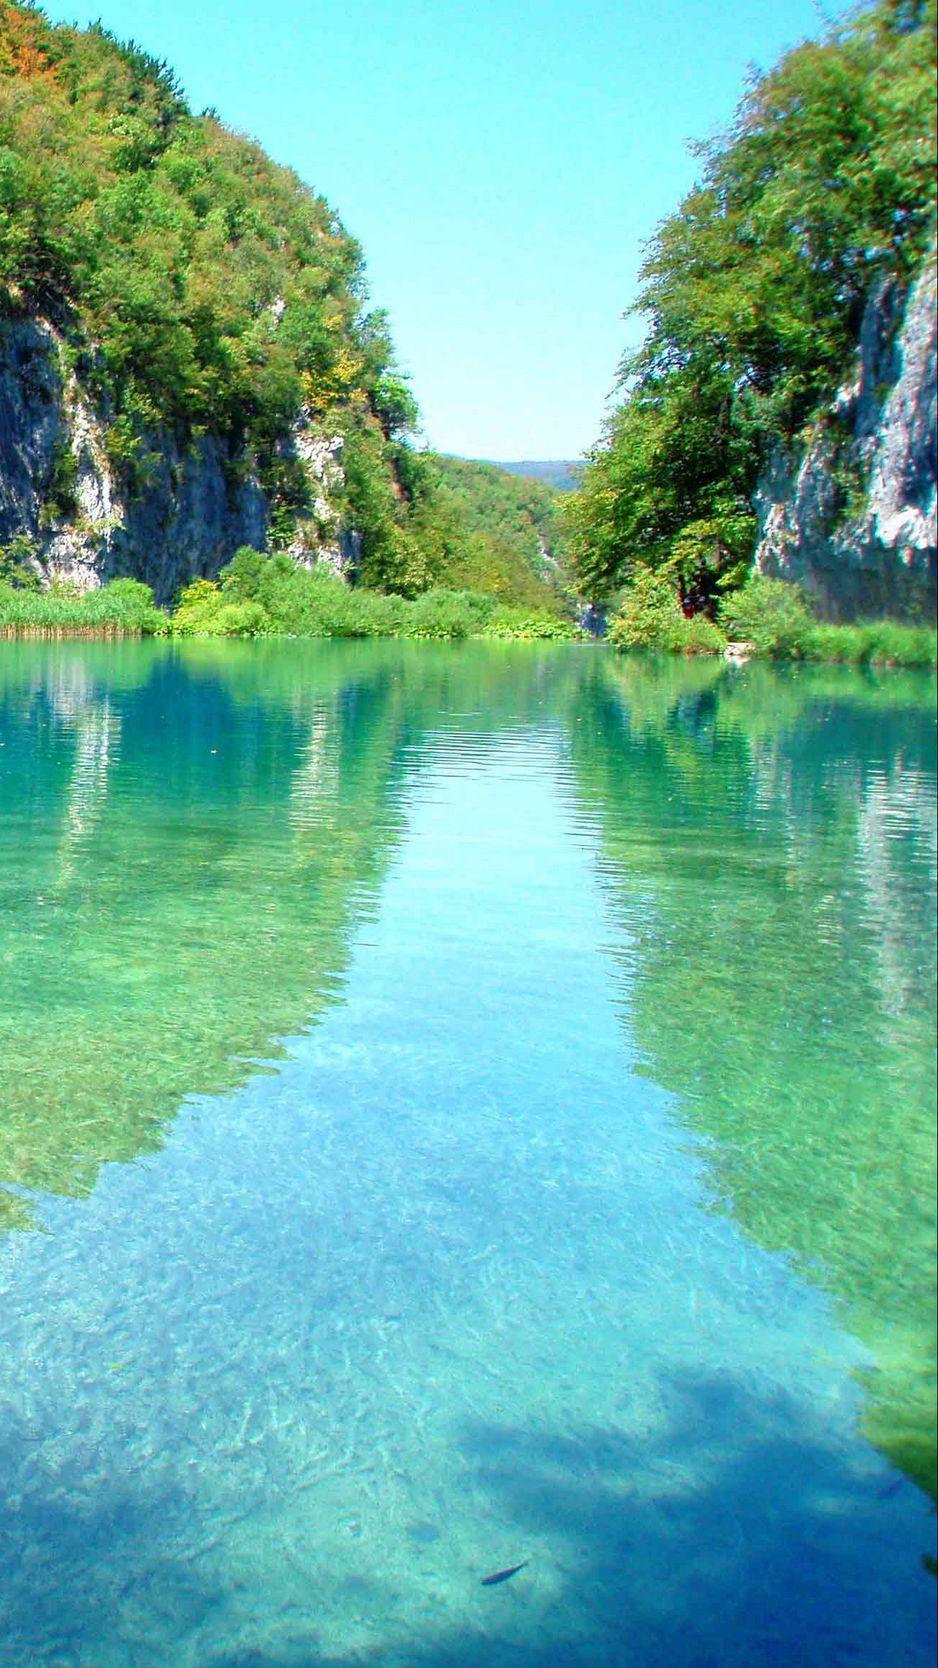 938x1668 Download Wallpaper 938x1668 Plitvice Lakes, Croatia, Lake, Park, Mountain Iphone 8 7 6s 6 For Parallax HD Background